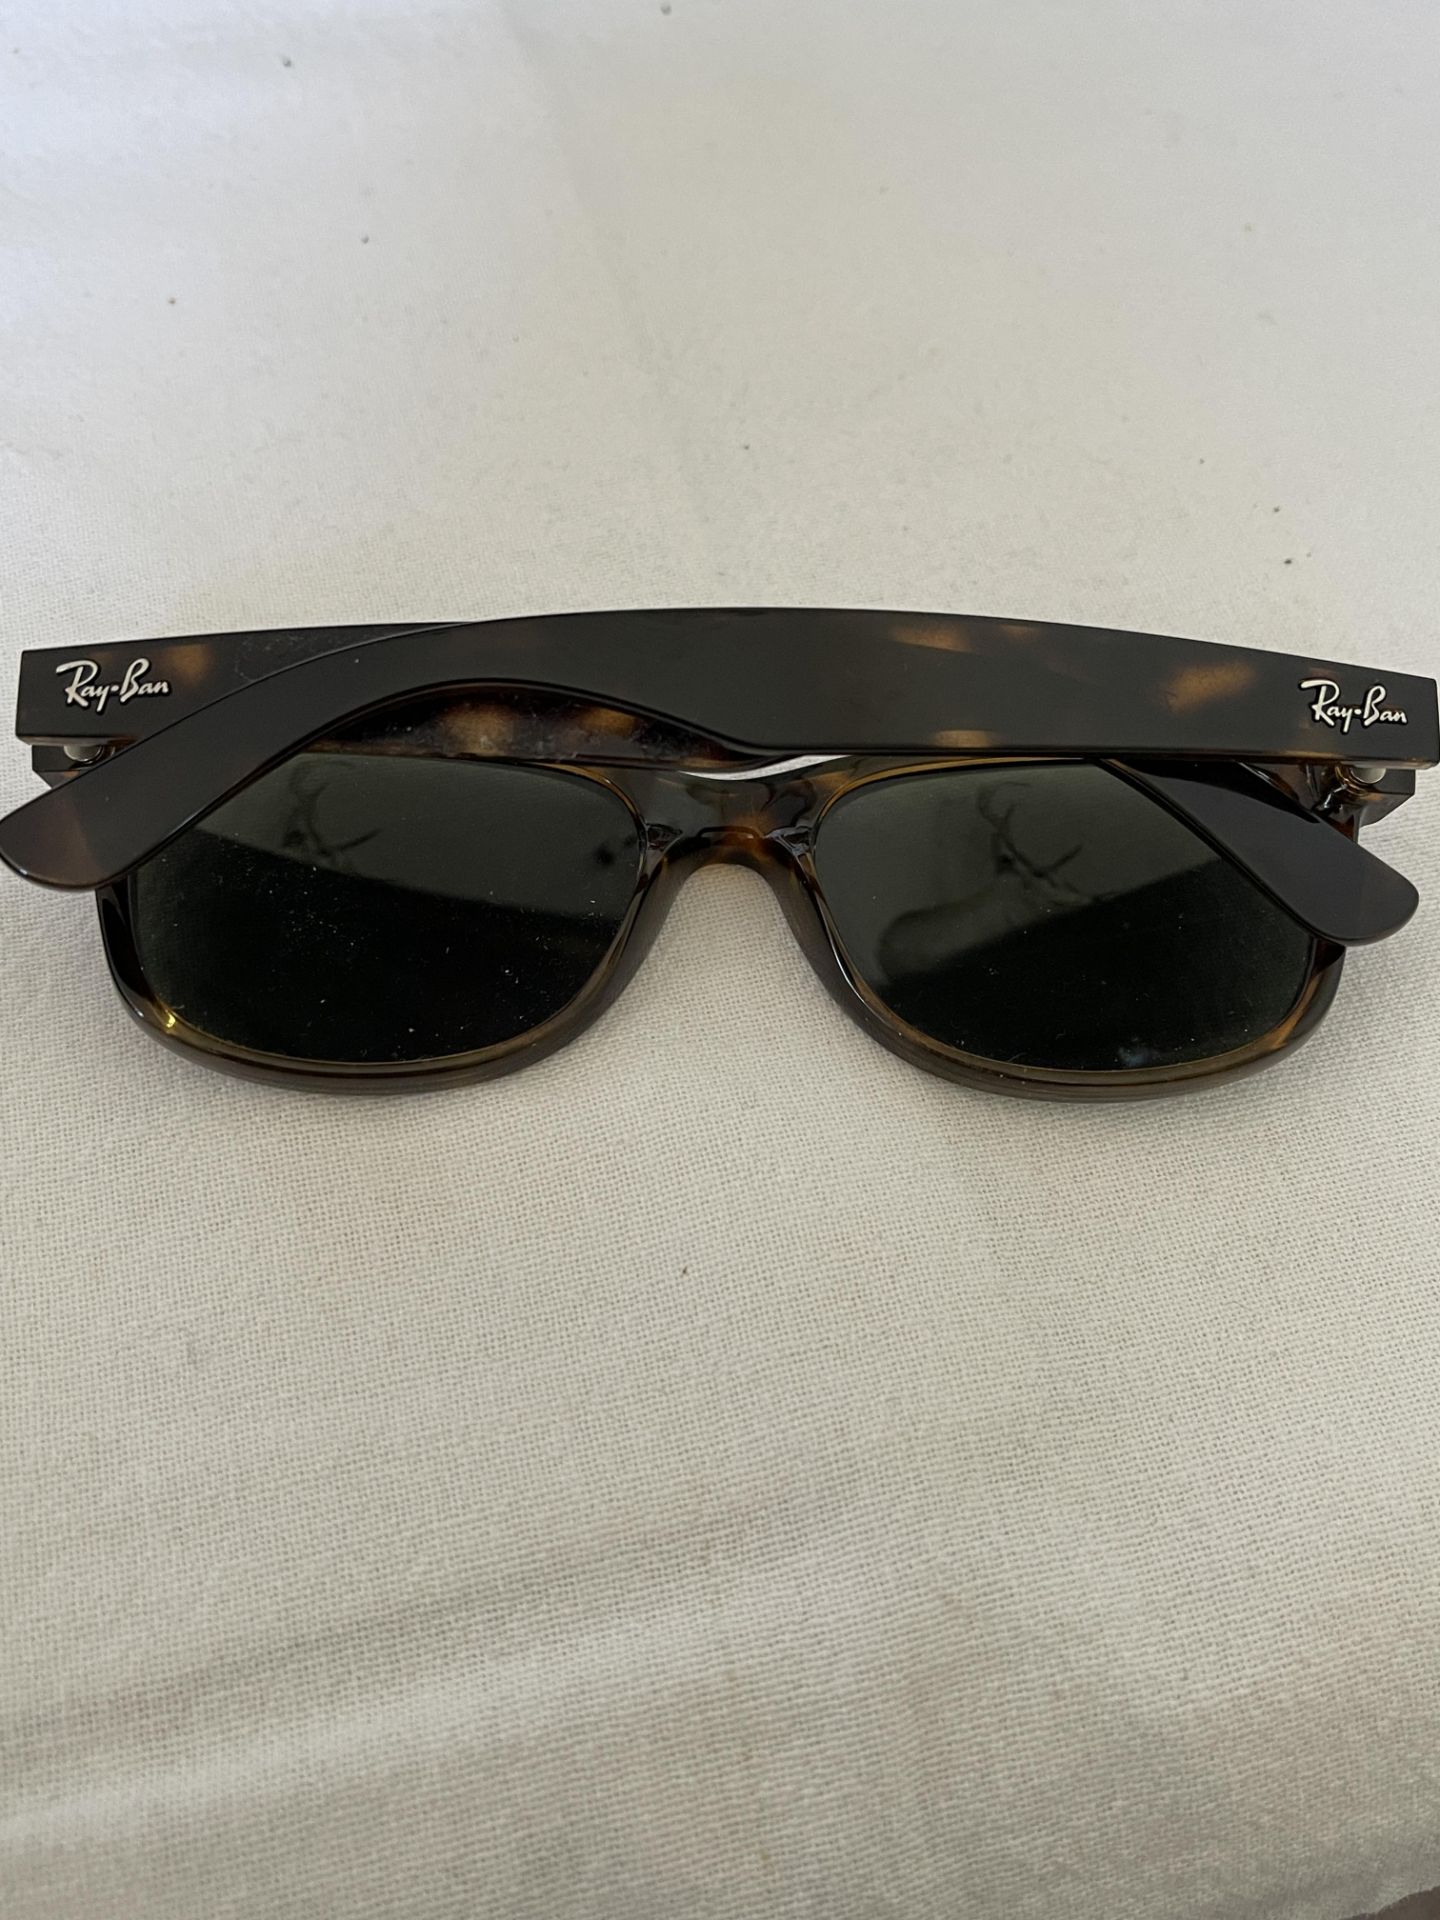 Ray Ban New Wayfarer xdemo from a private jet charter. sunglasses - Image 2 of 4